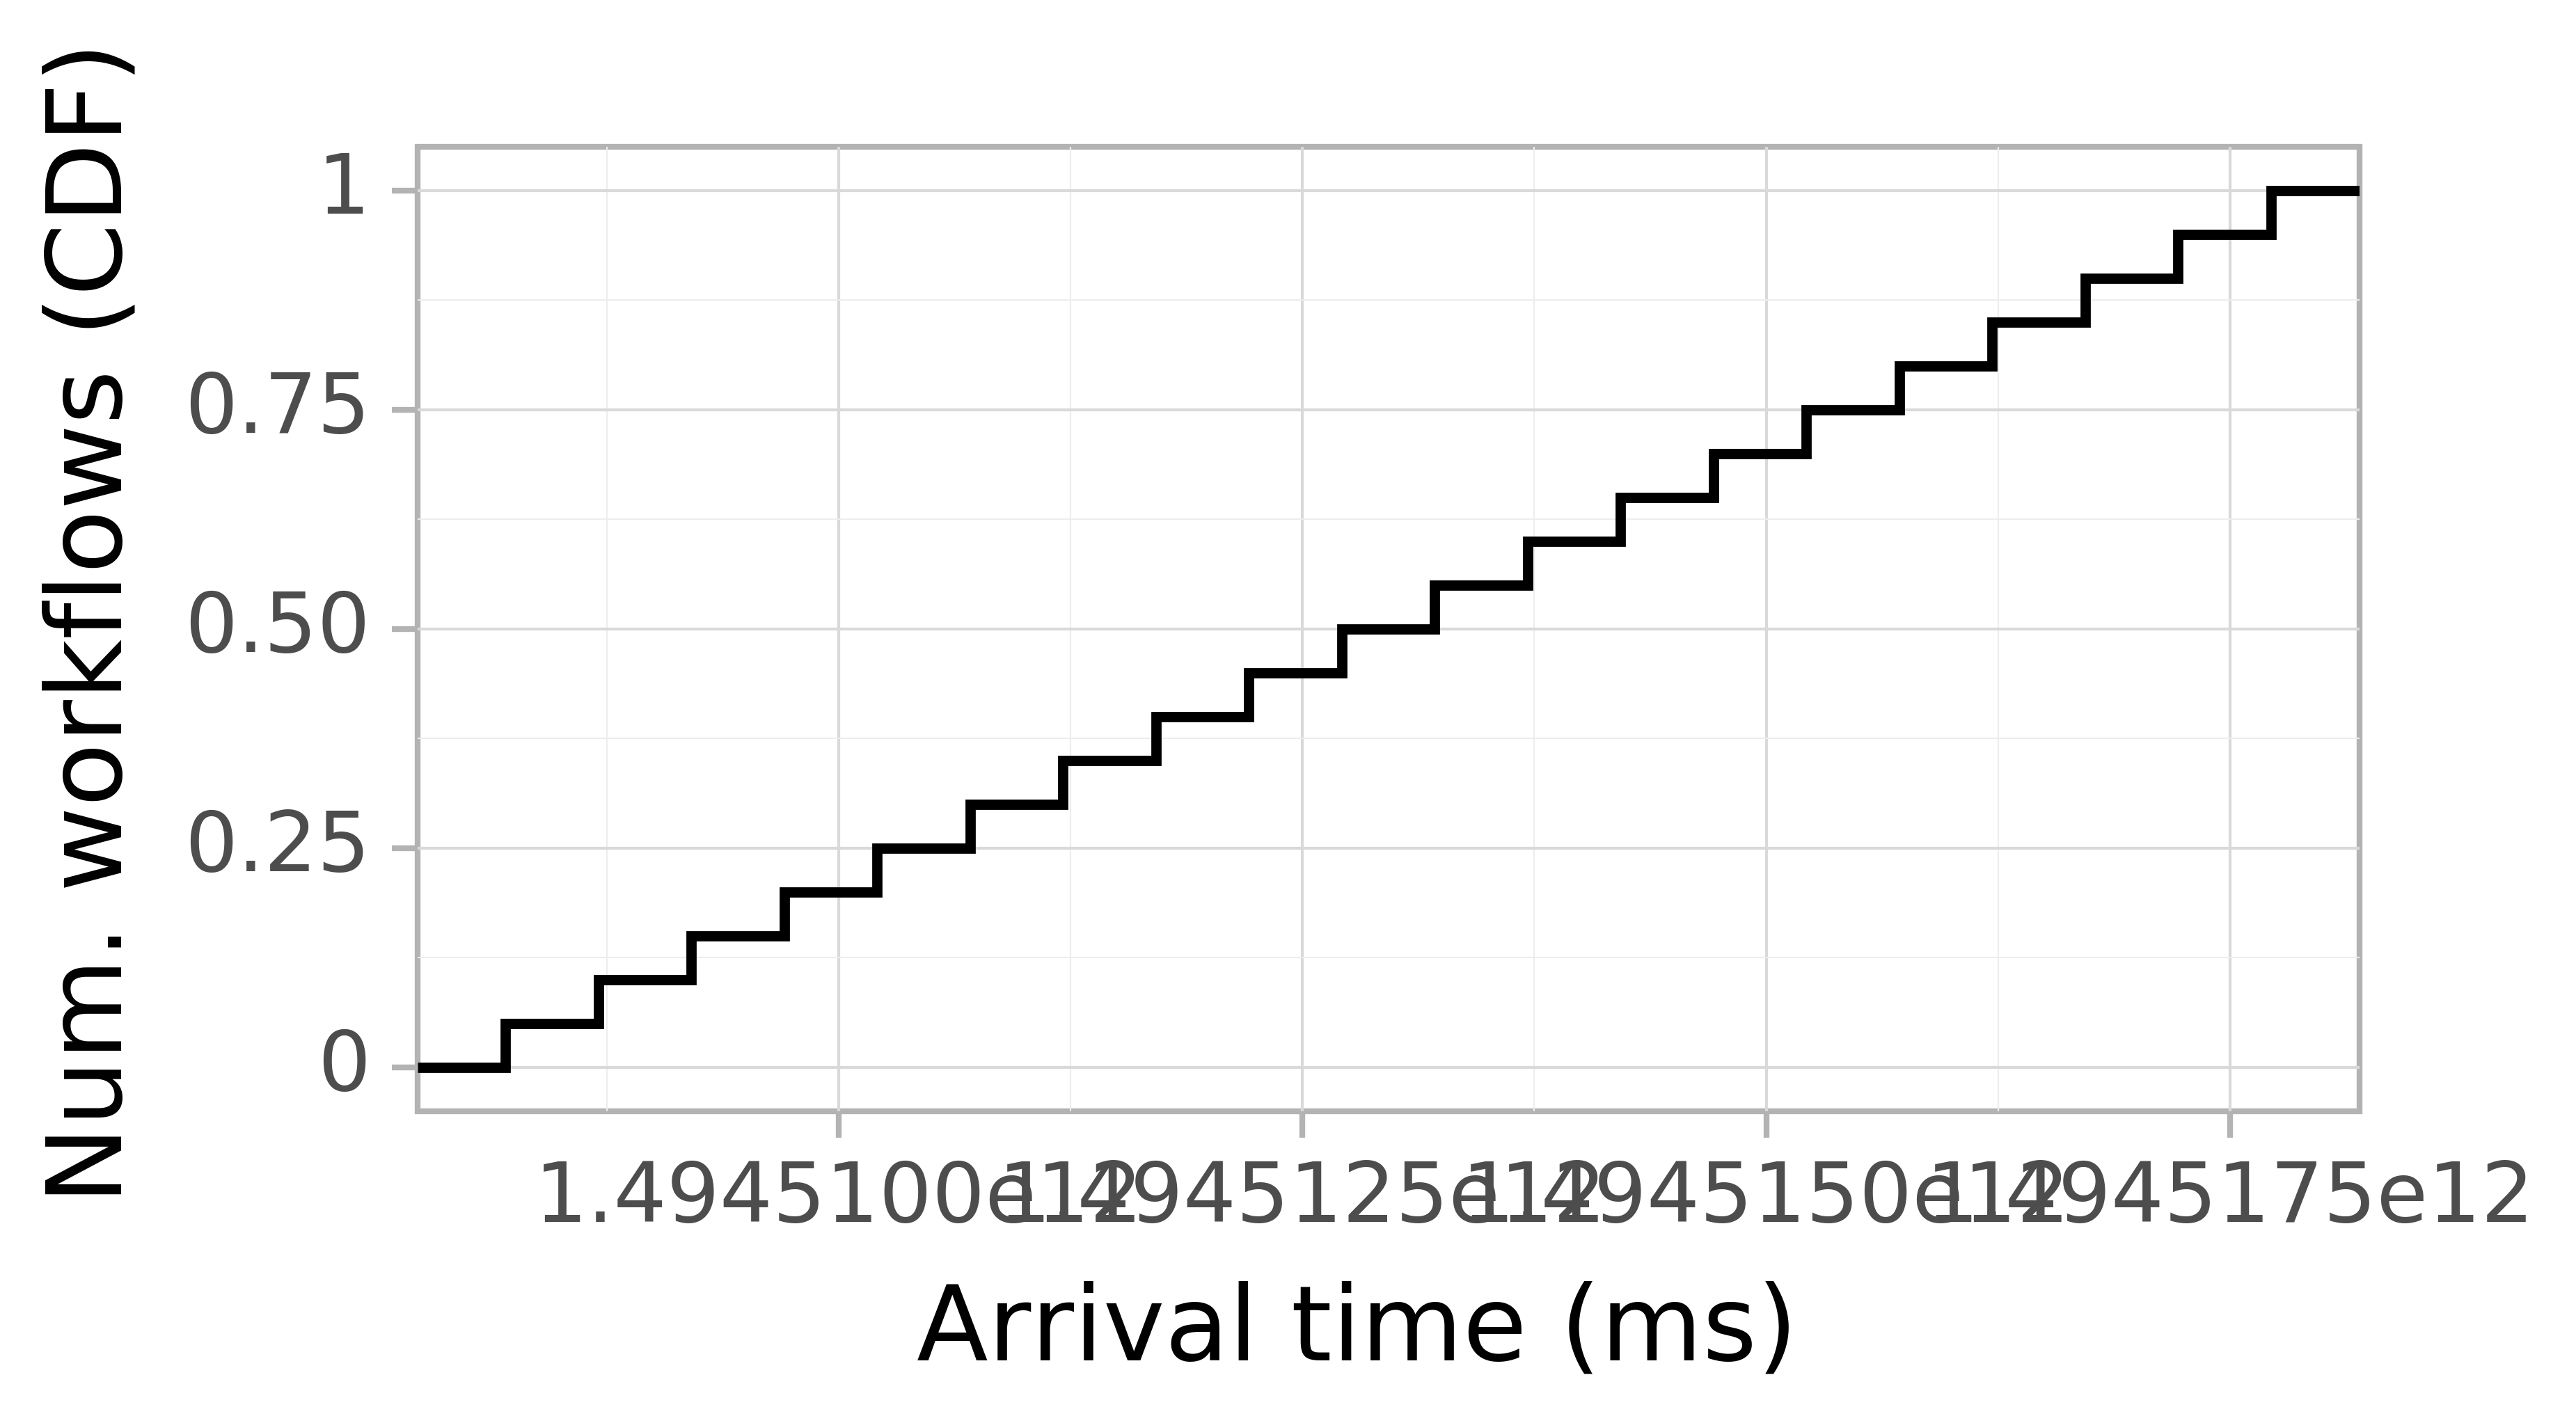 Job arrival CDF graph for the askalon-new_ee58 trace.